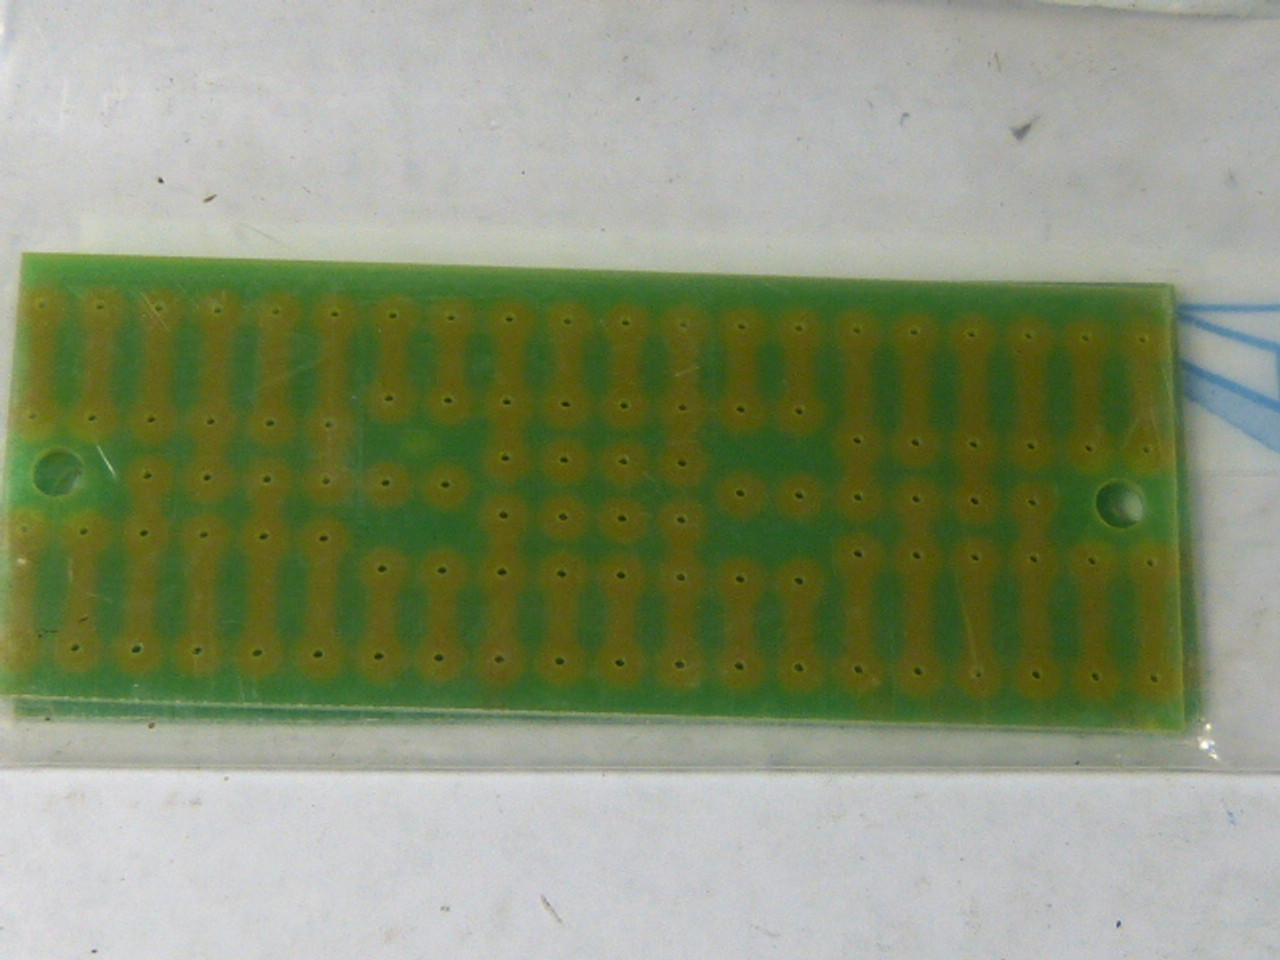 Multivac 86.121.4125.30 Printed Circuit Board Pack of 2 ! NEW !